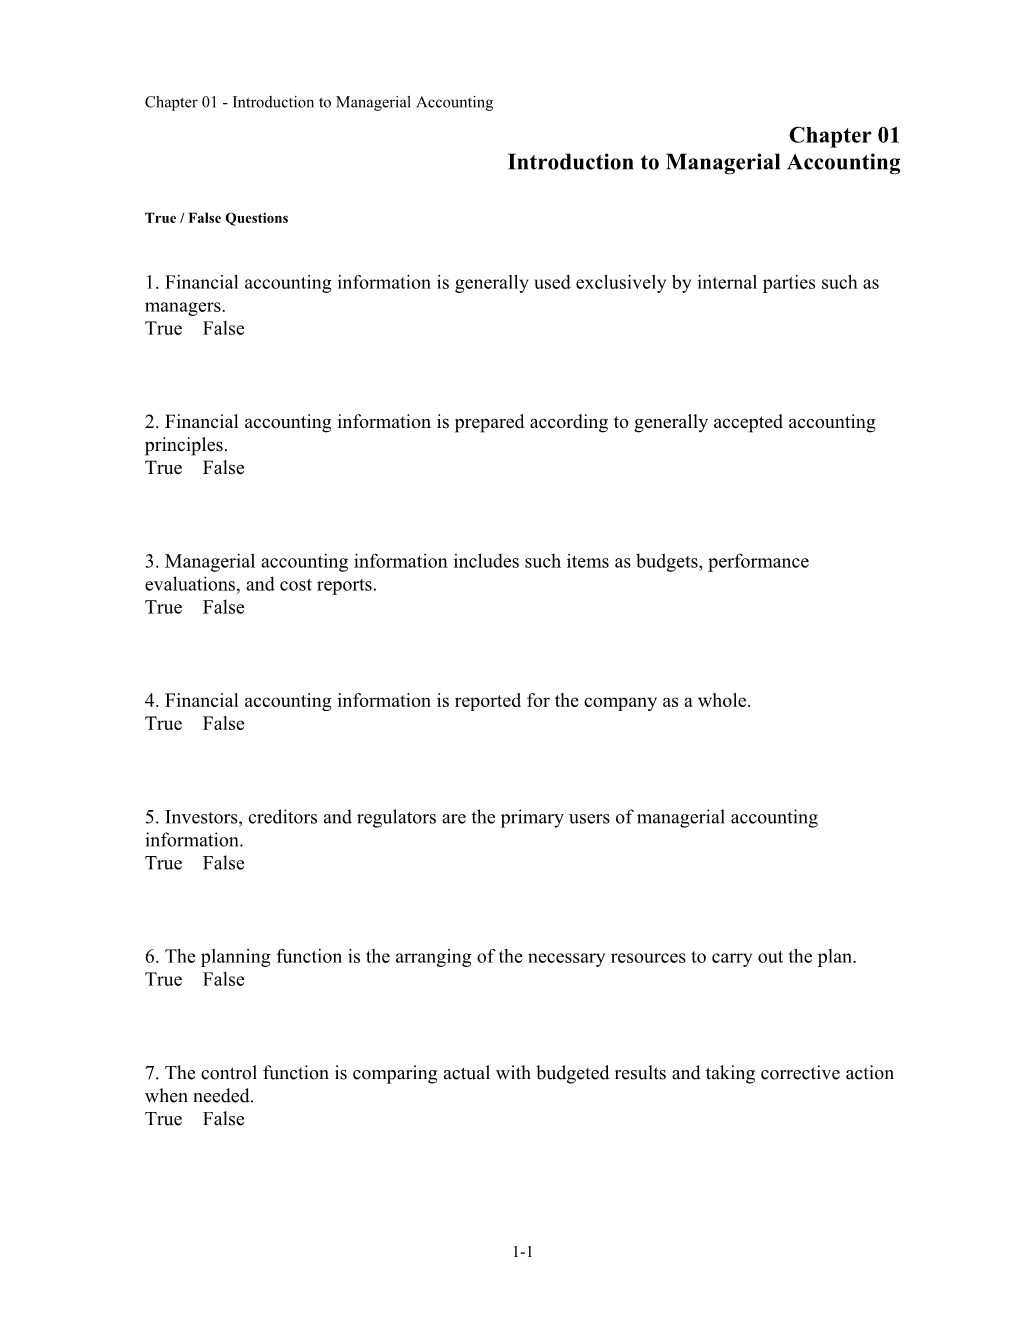 Chapter 01 Introduction to Managerial Accounting